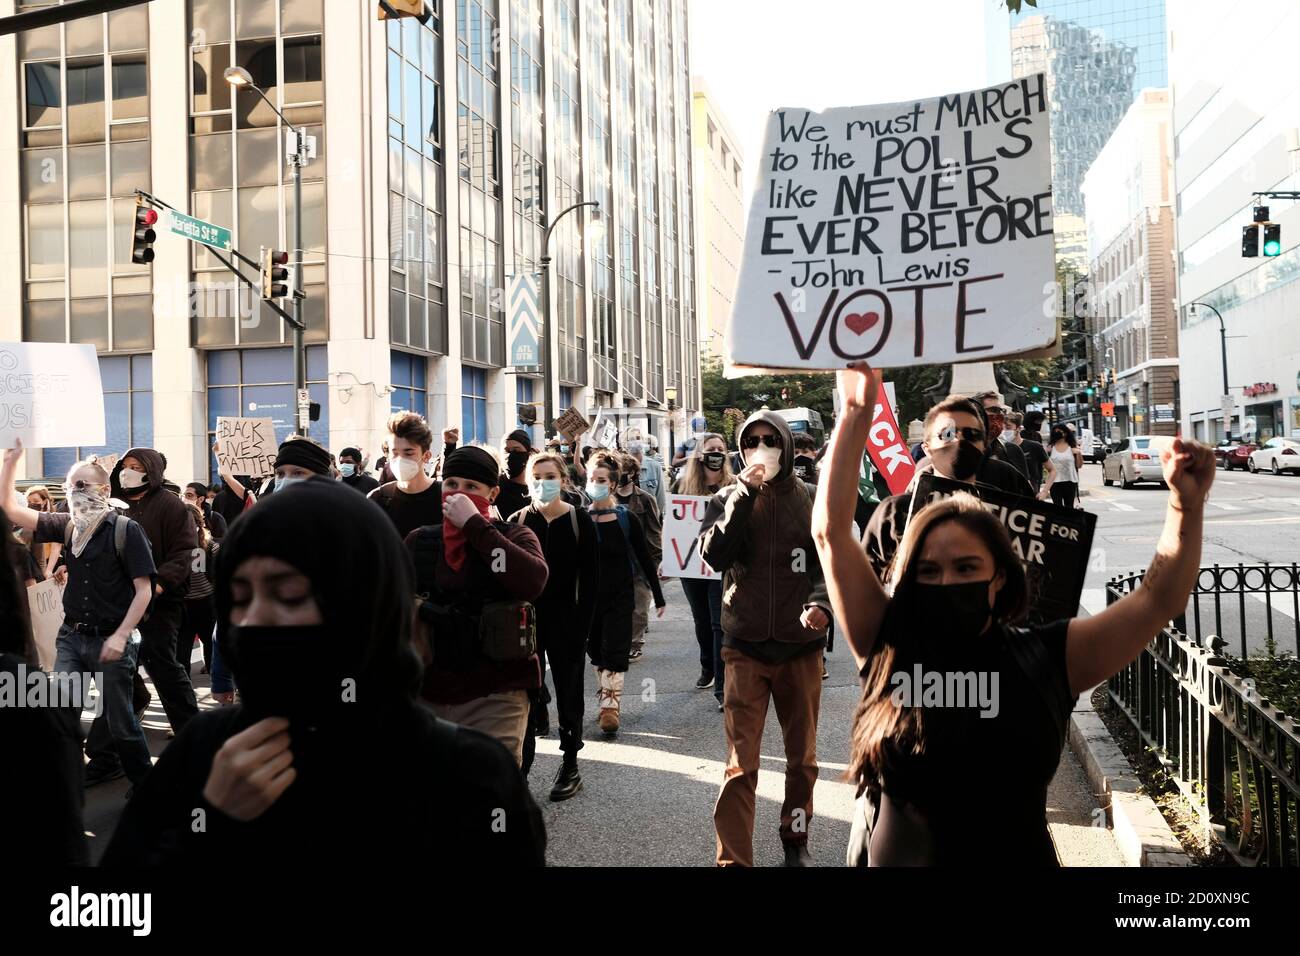 Atlanta, Georgia, USA. October 3, 2020: A demonstrator participatimg in a march against police brutality in Atlanta, holds a sign saying We must MARCH to the POLLS like NEVER EVER BEFORE - John Lewis VOTE. Credit: John Arthur Brown/ZUMA Wire/Alamy Live News Stock Photo